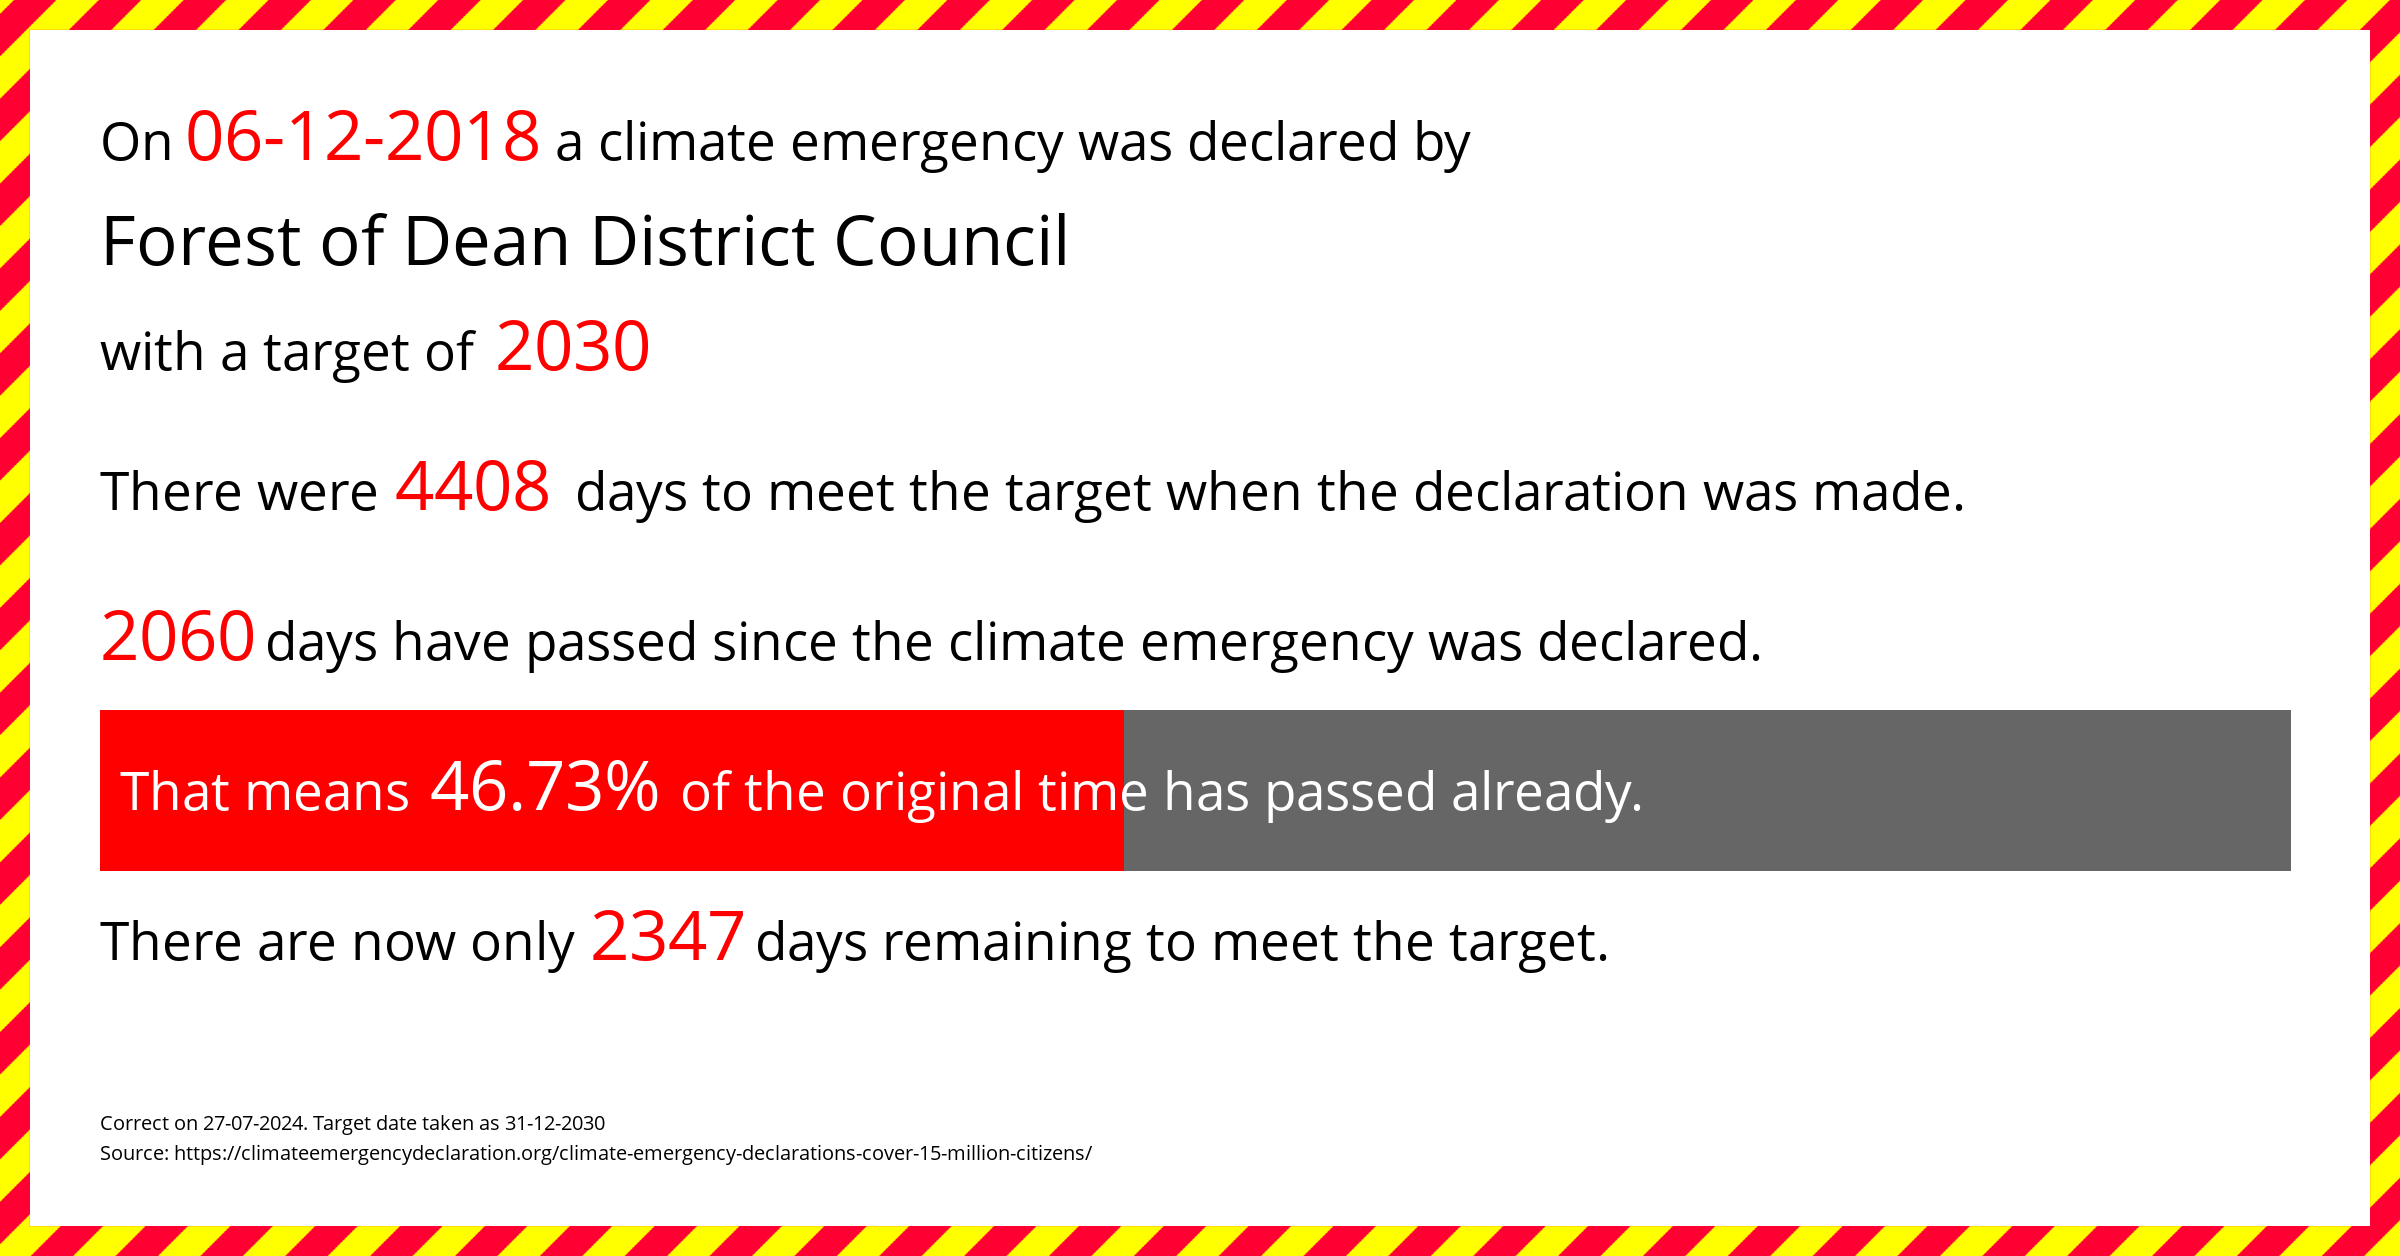 Forest of Dean District Council declared a Climate emergency on Thursday 6th December 2018, with a target of 2030.